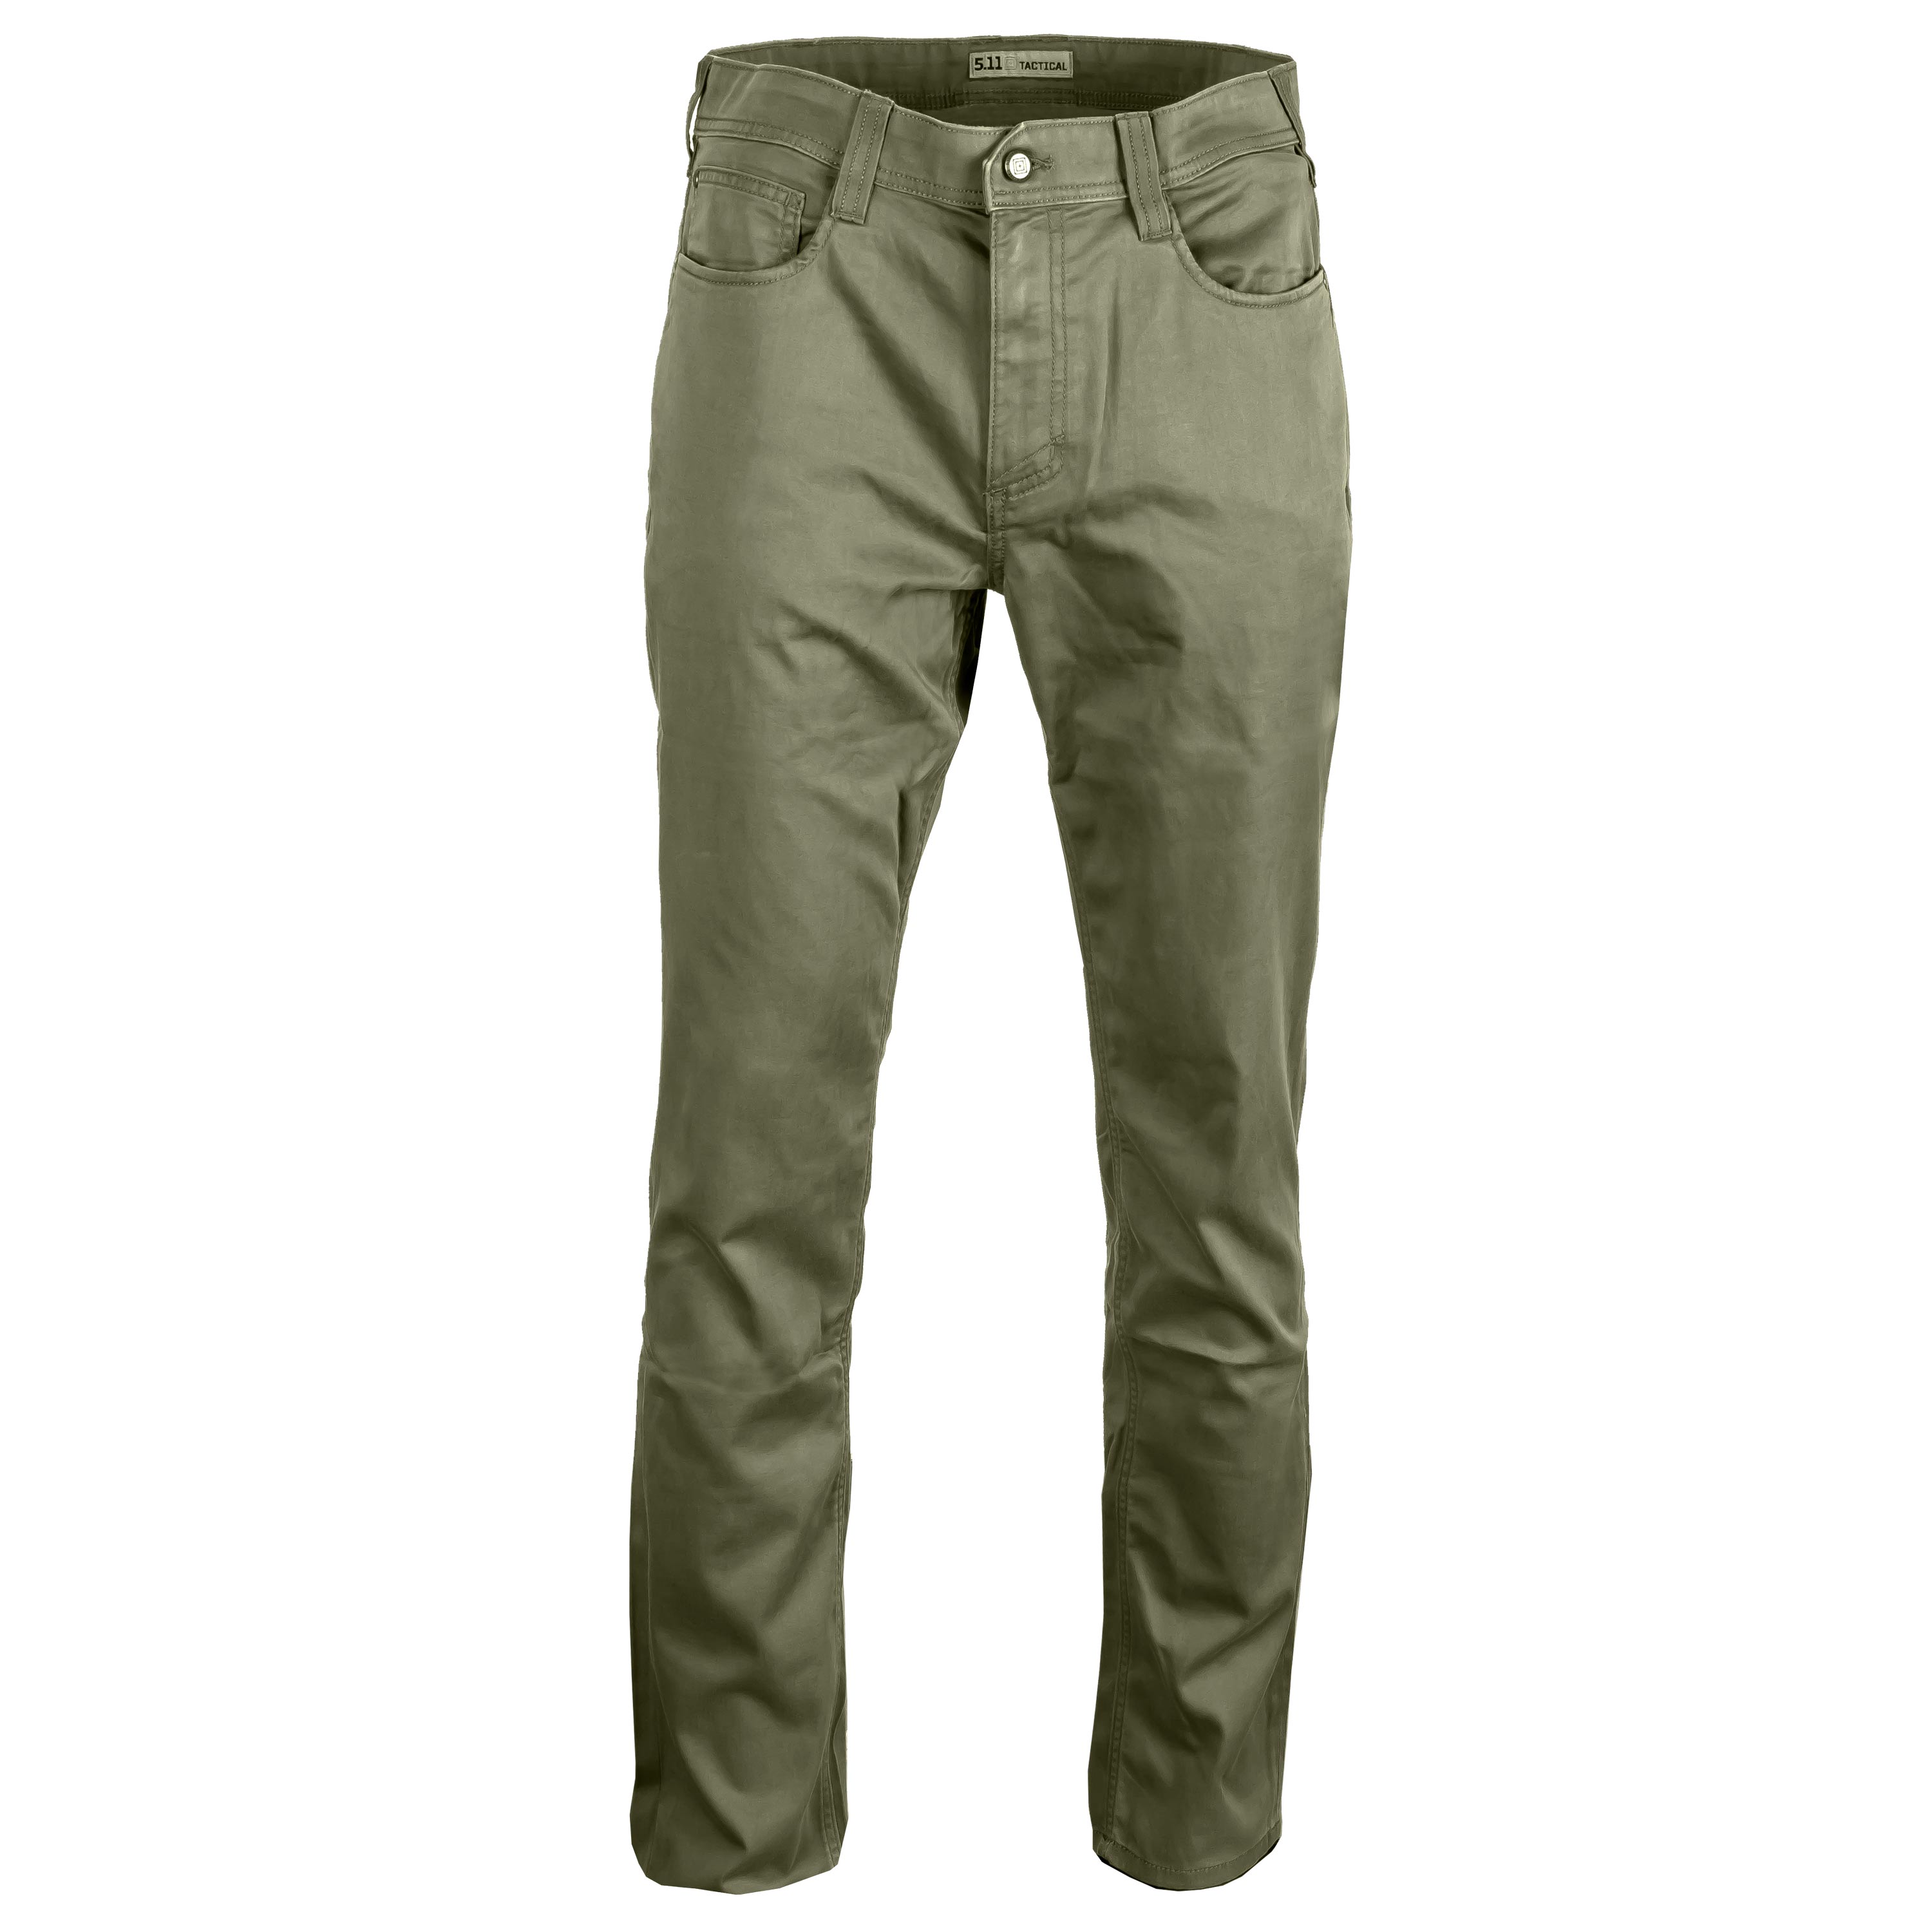 Purchase the 5.11 Defender-Flex Prestige Pant ranger green by AS